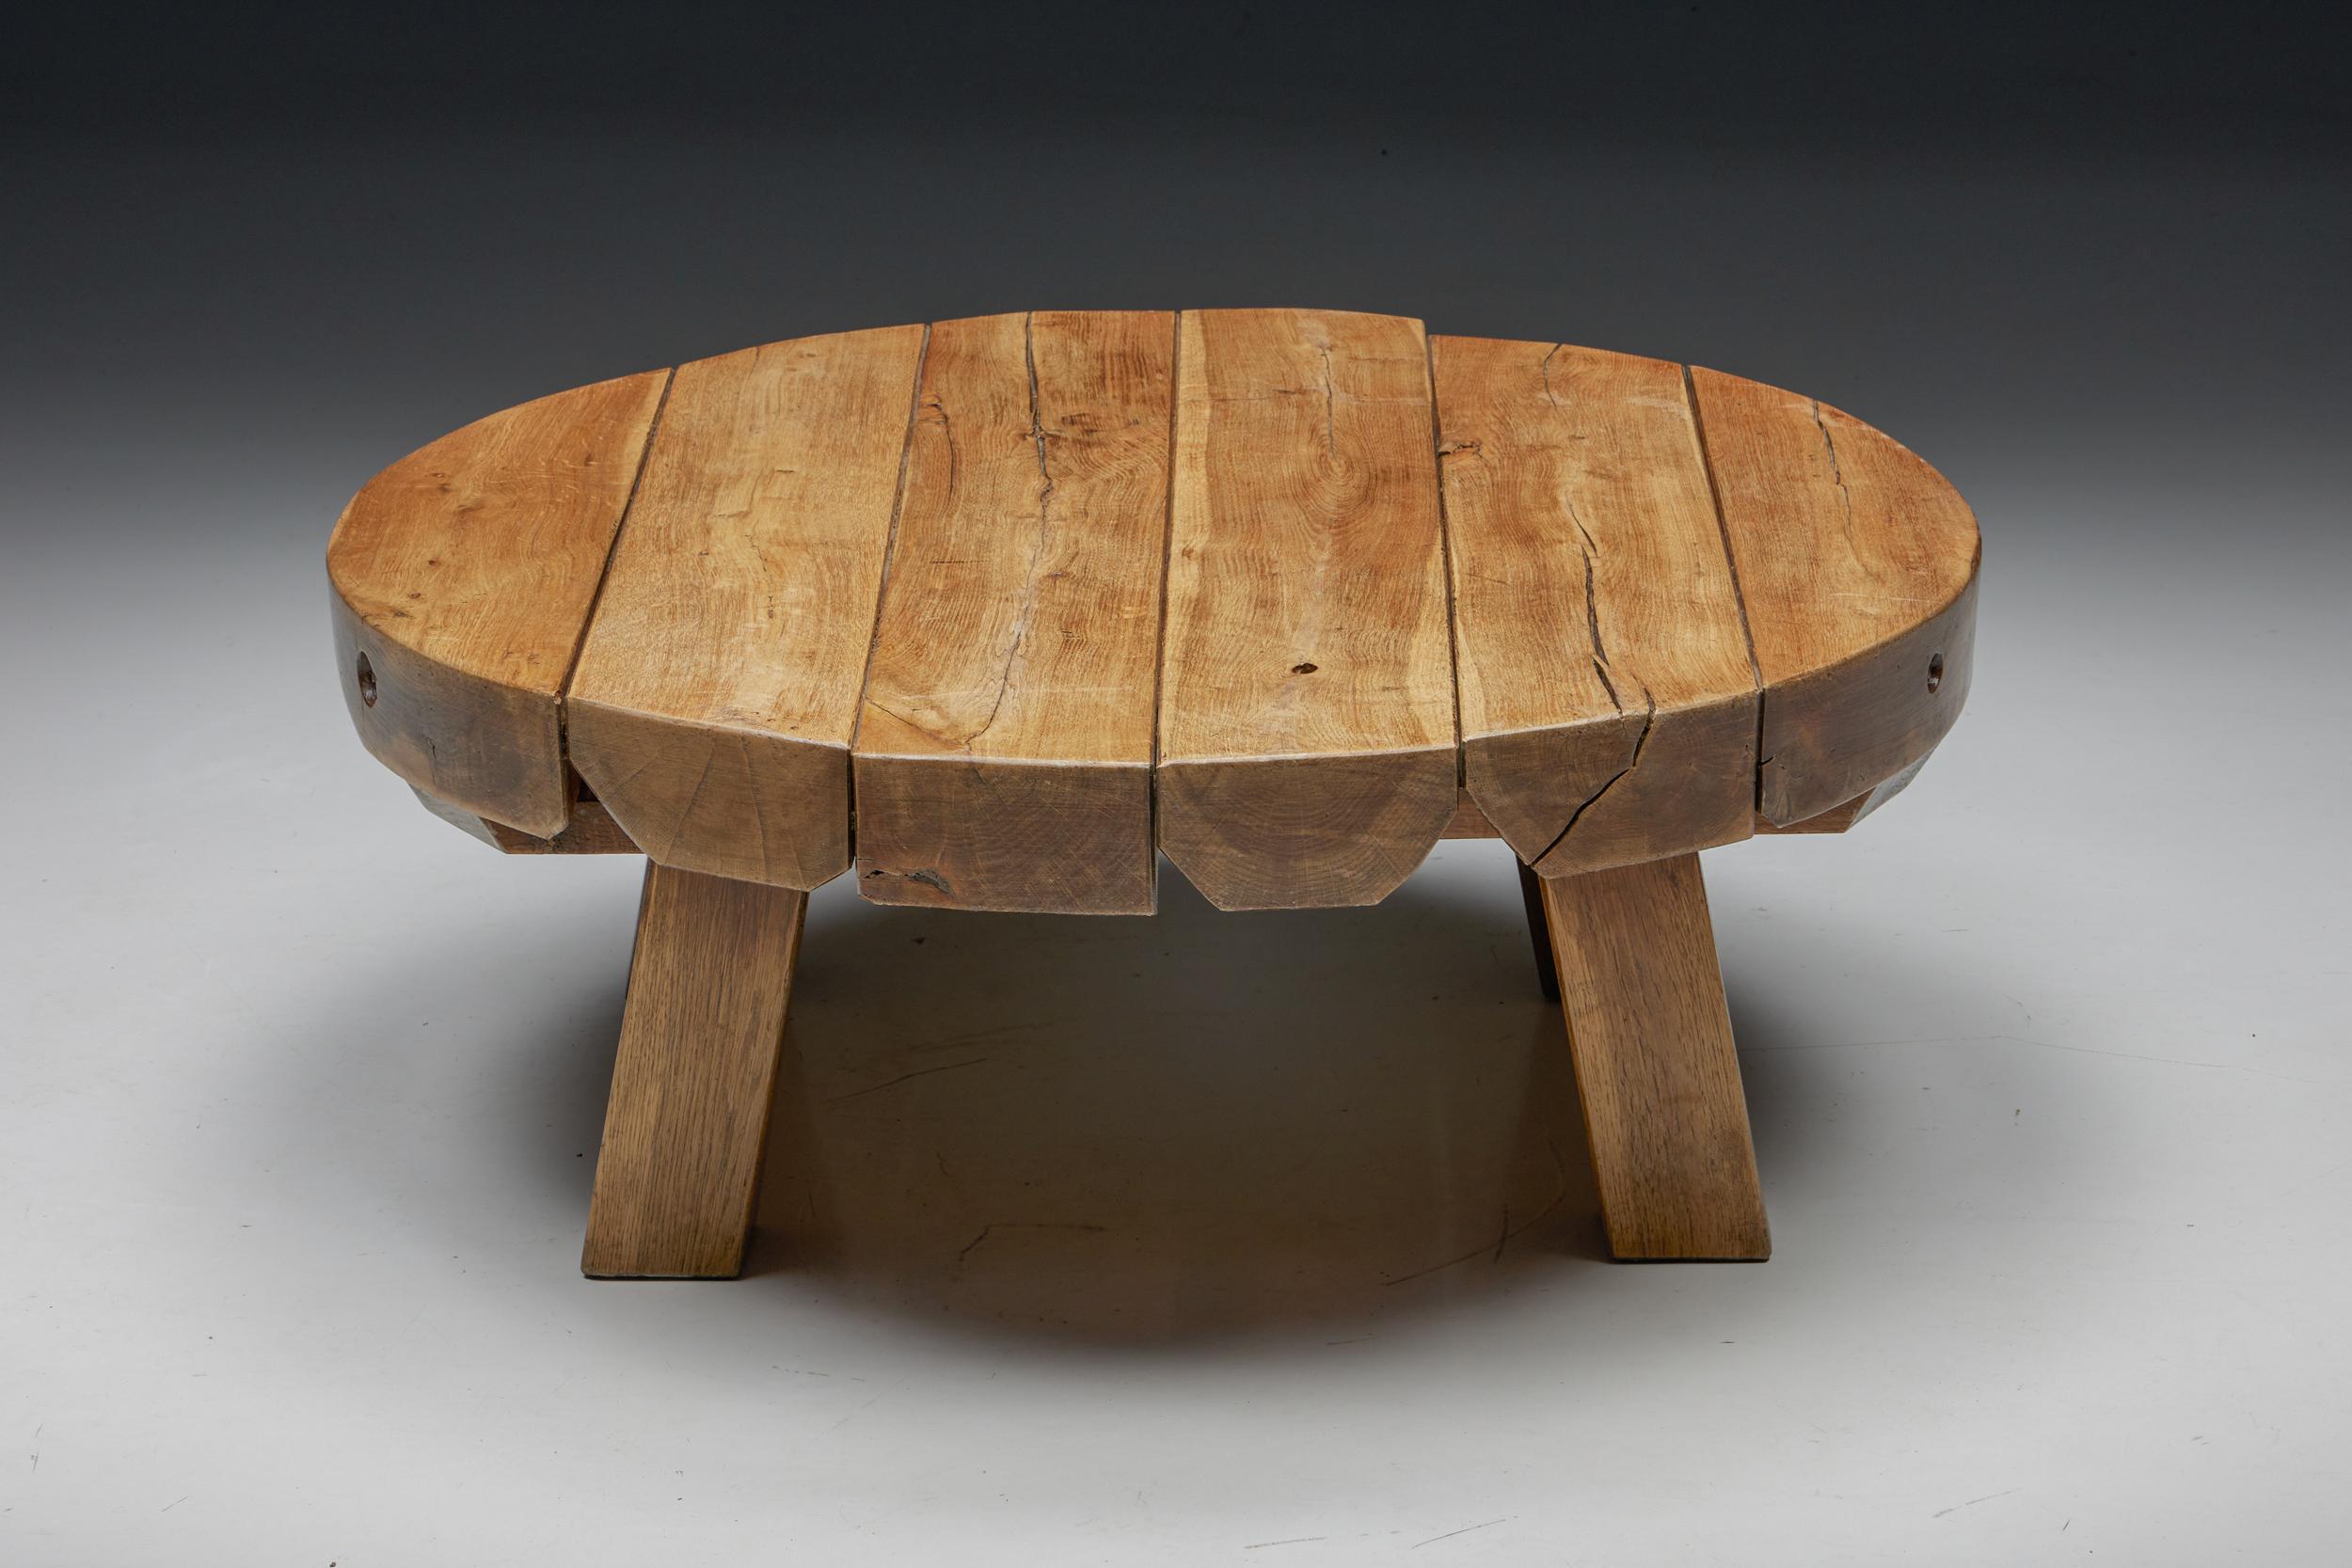 Rustic; Round; Rural; Robust; Wabi-Sabi; Wooden; Coffee Table; France; 1950s;

This rustic round coffee table with a four-legged base is made of wood with a very charismatic patina. The rounded surface provides space for objects like books,